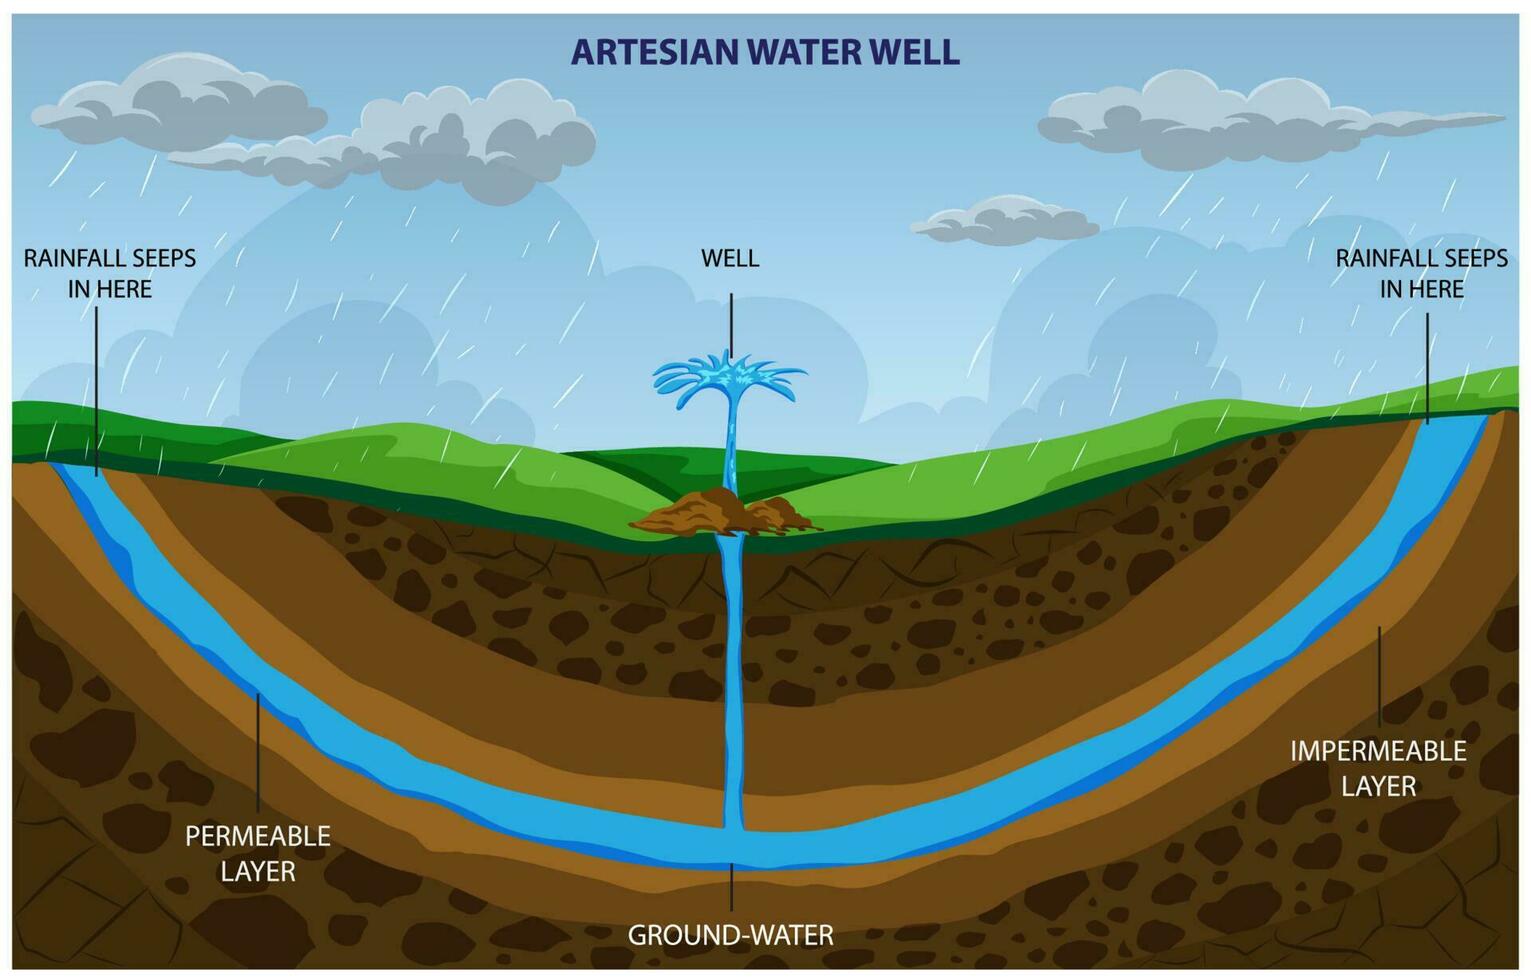 An artesian well taps into a confined aquifer, providing water without pumping vector